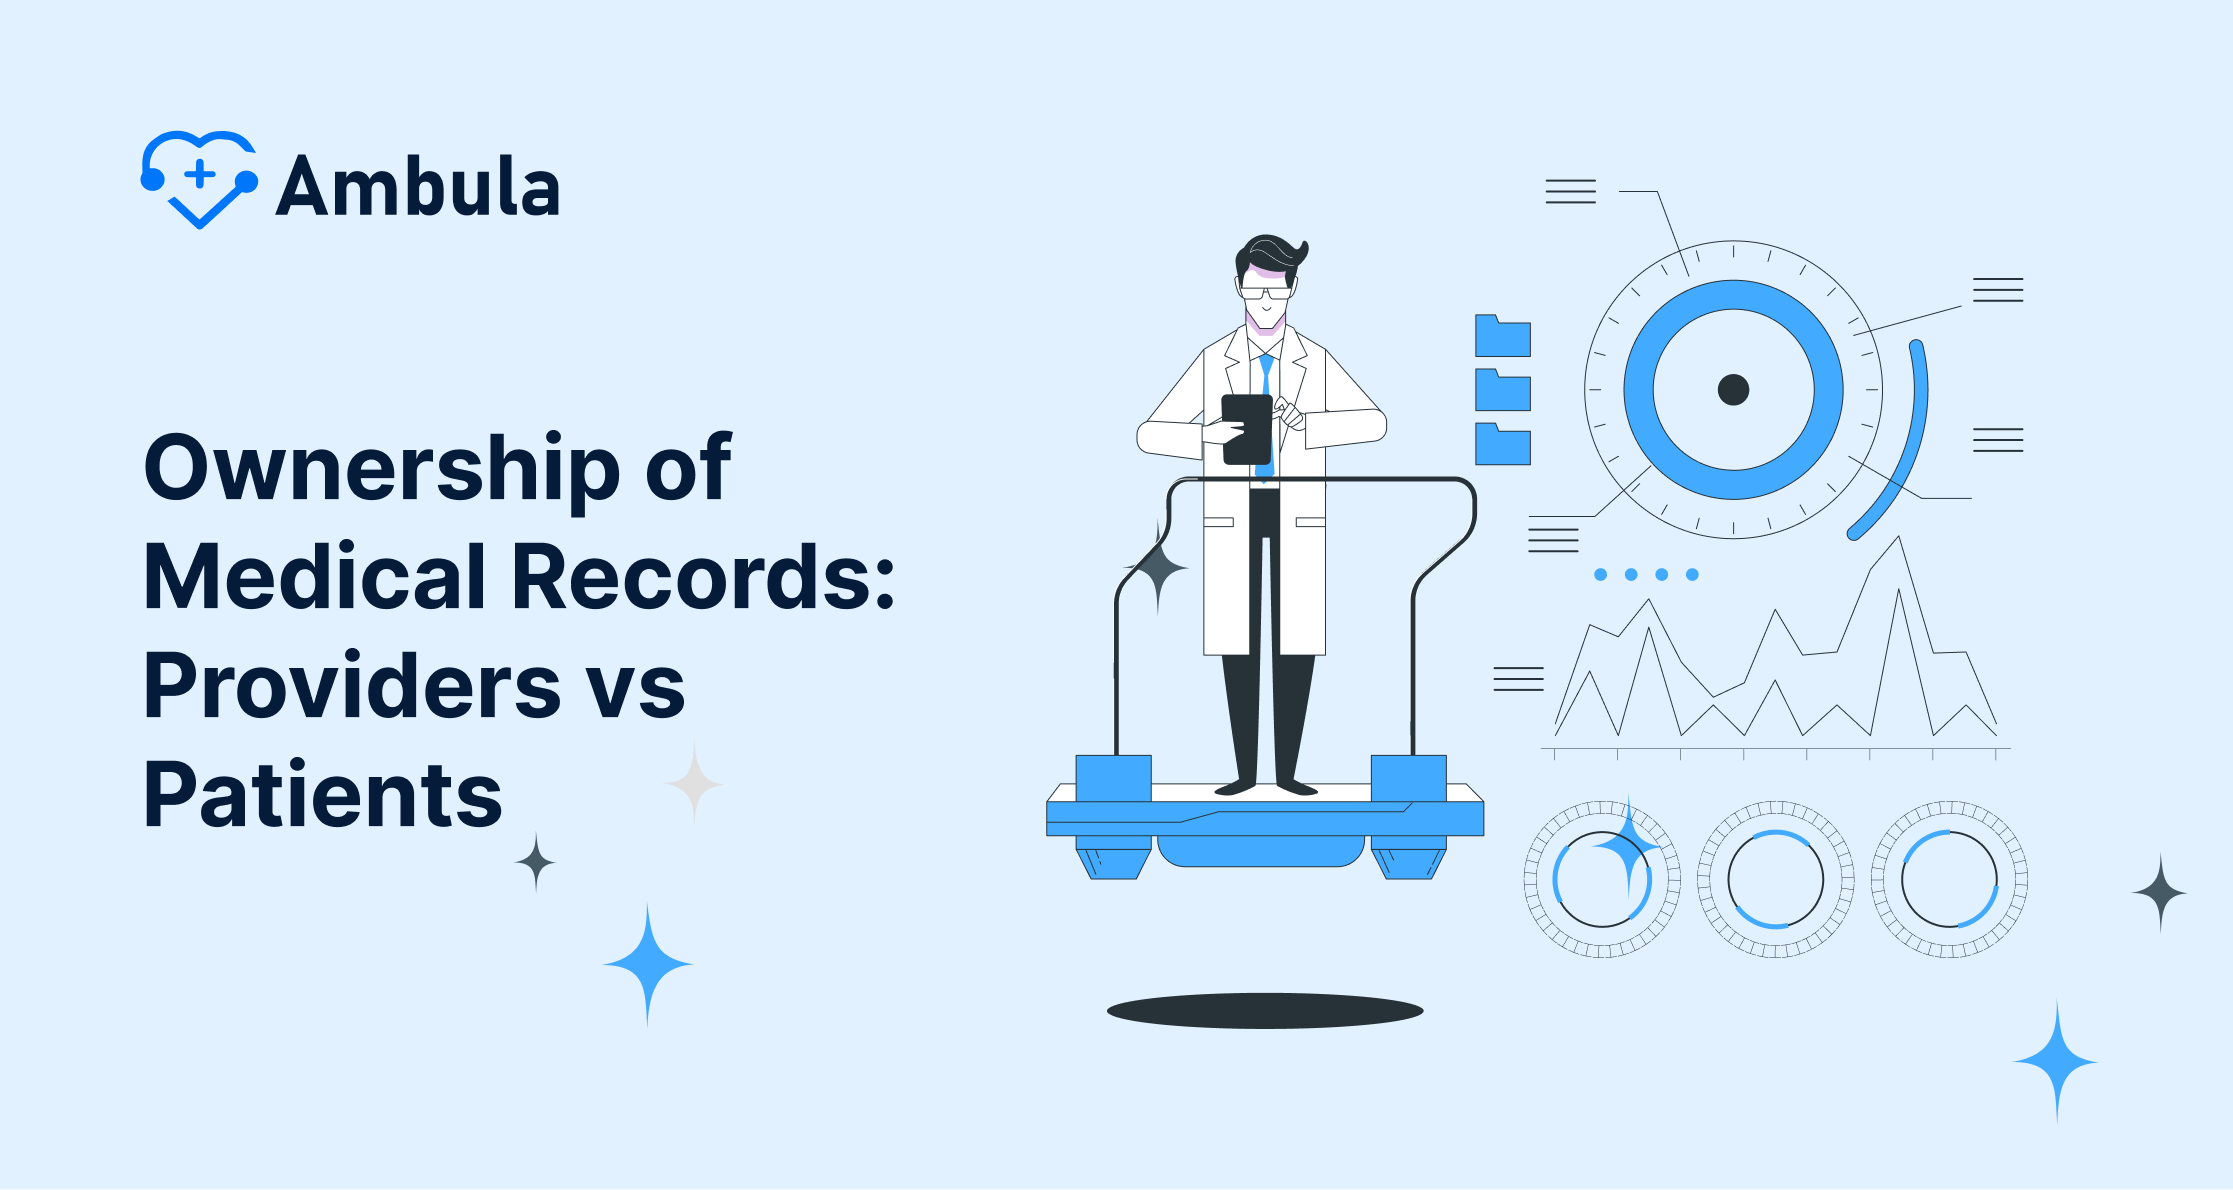 Ownership of Medical Records: Providers vs Patients